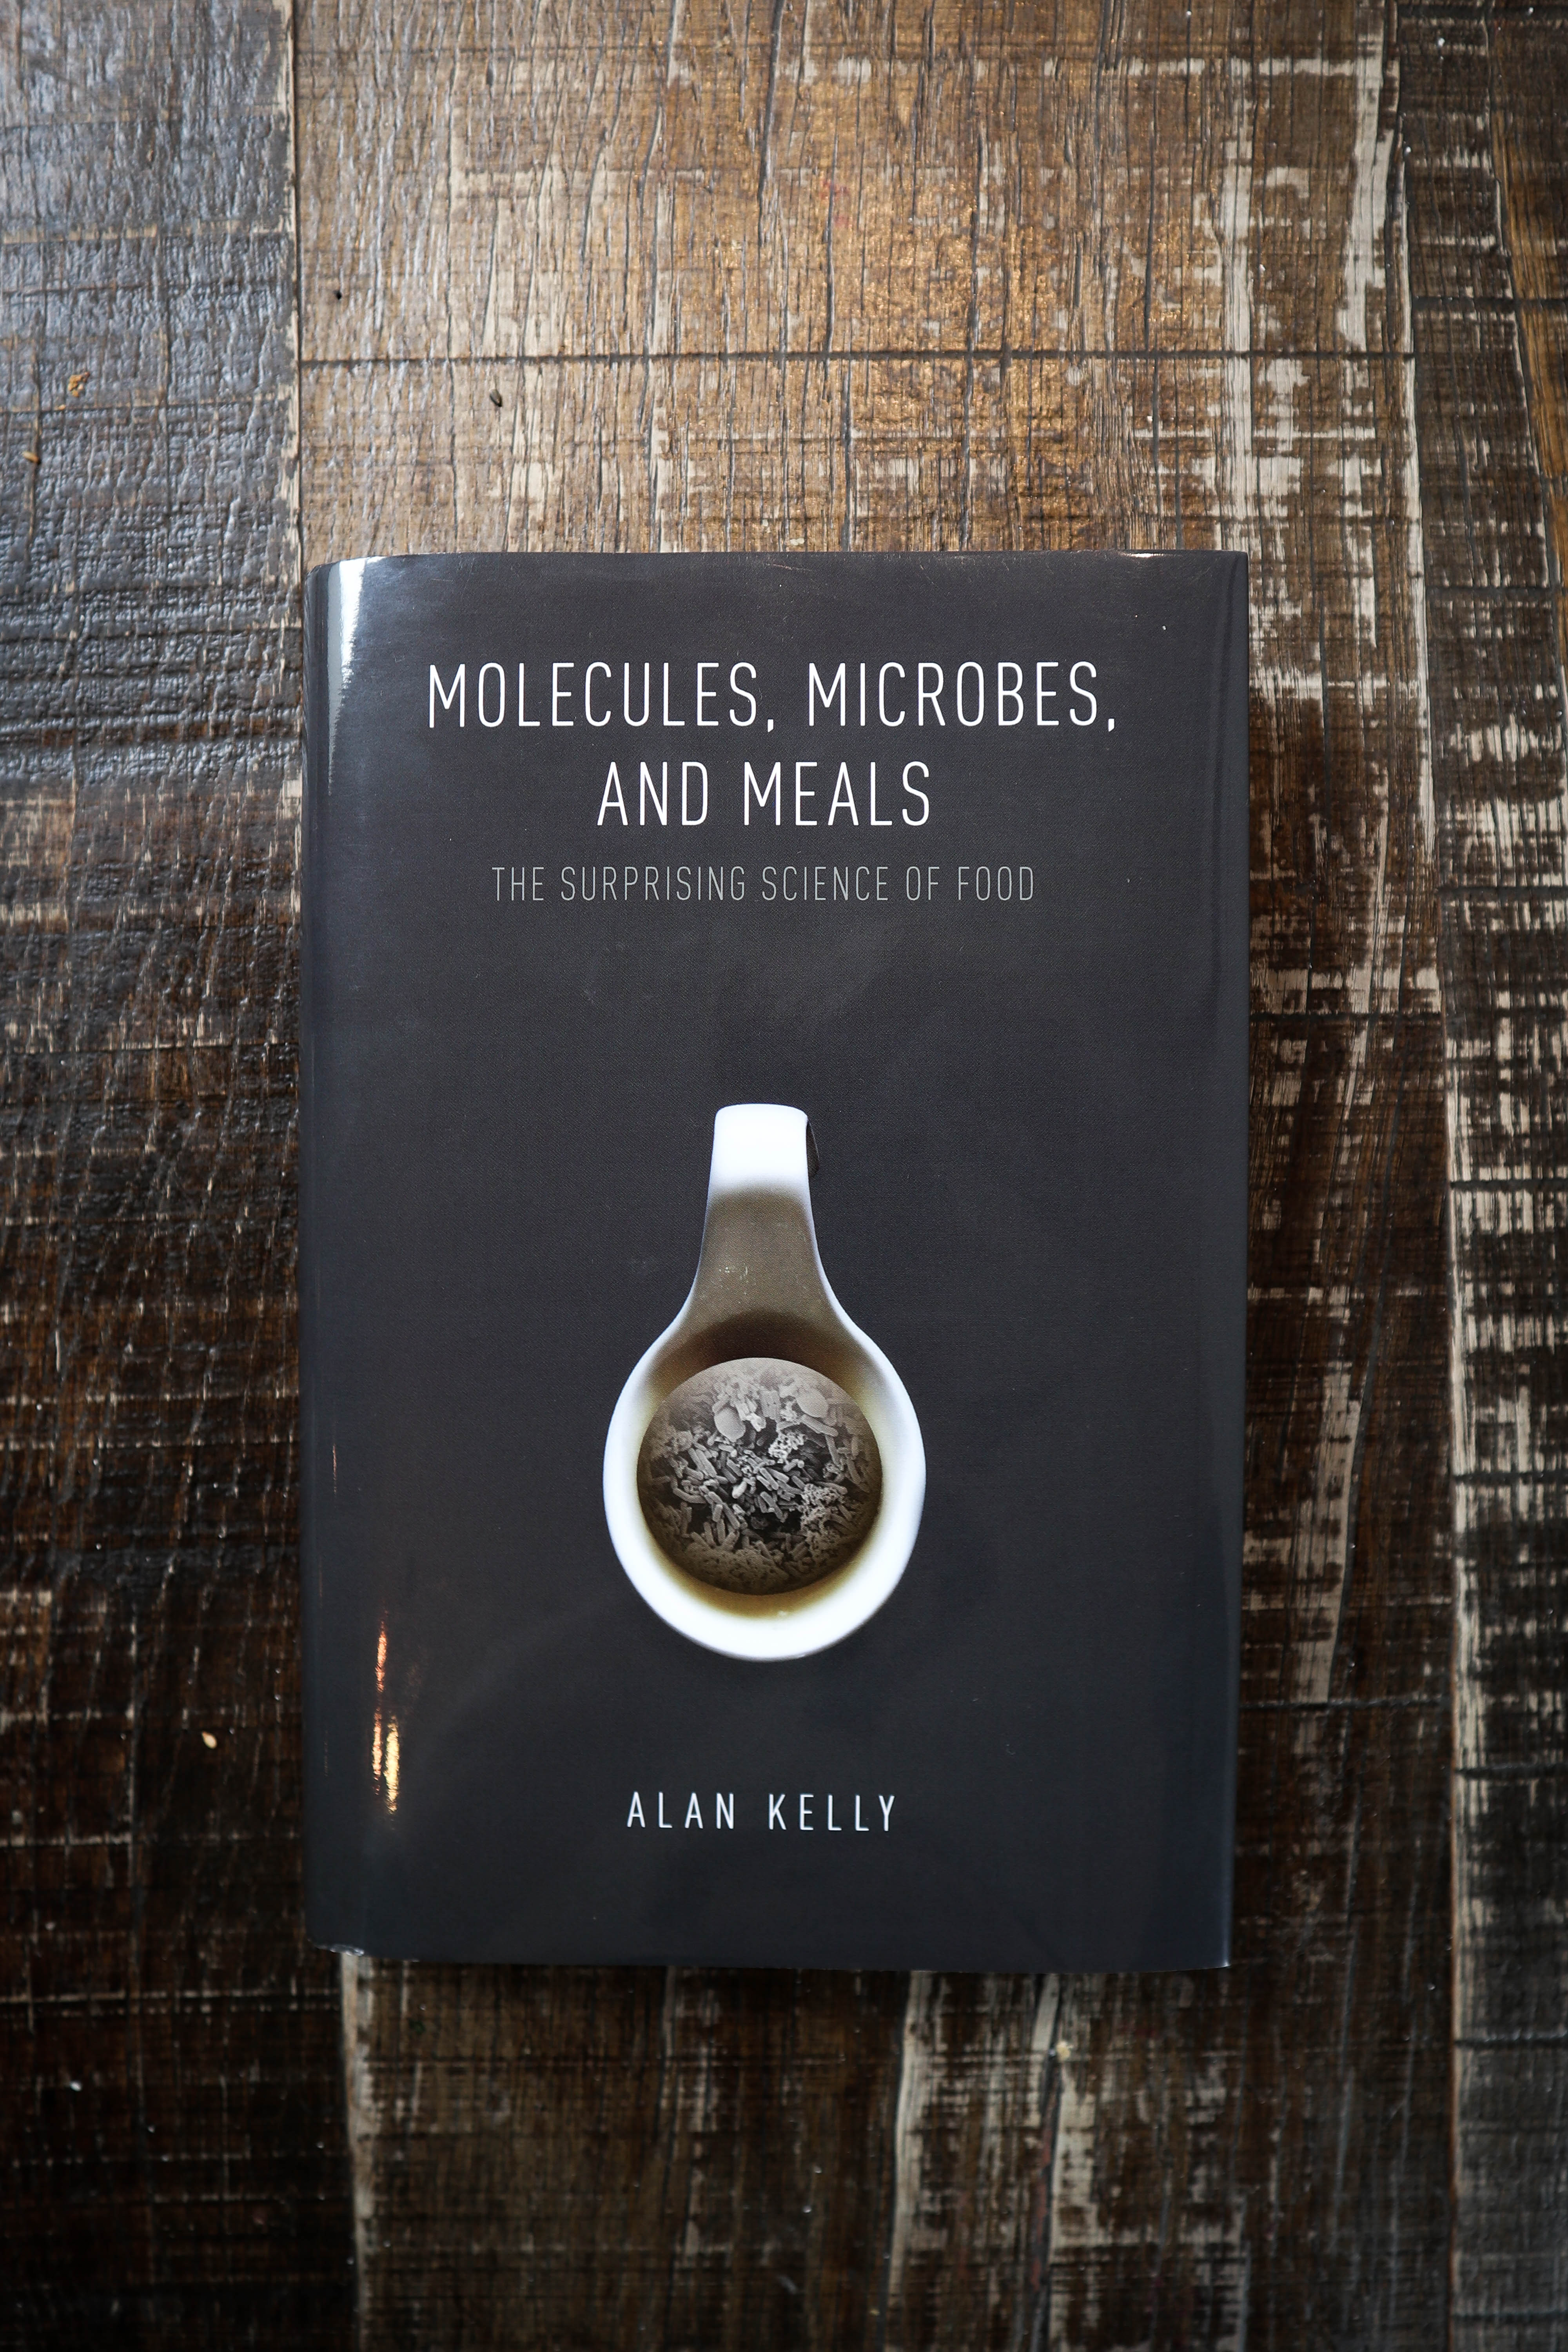 New food science book aimed at a wide audience